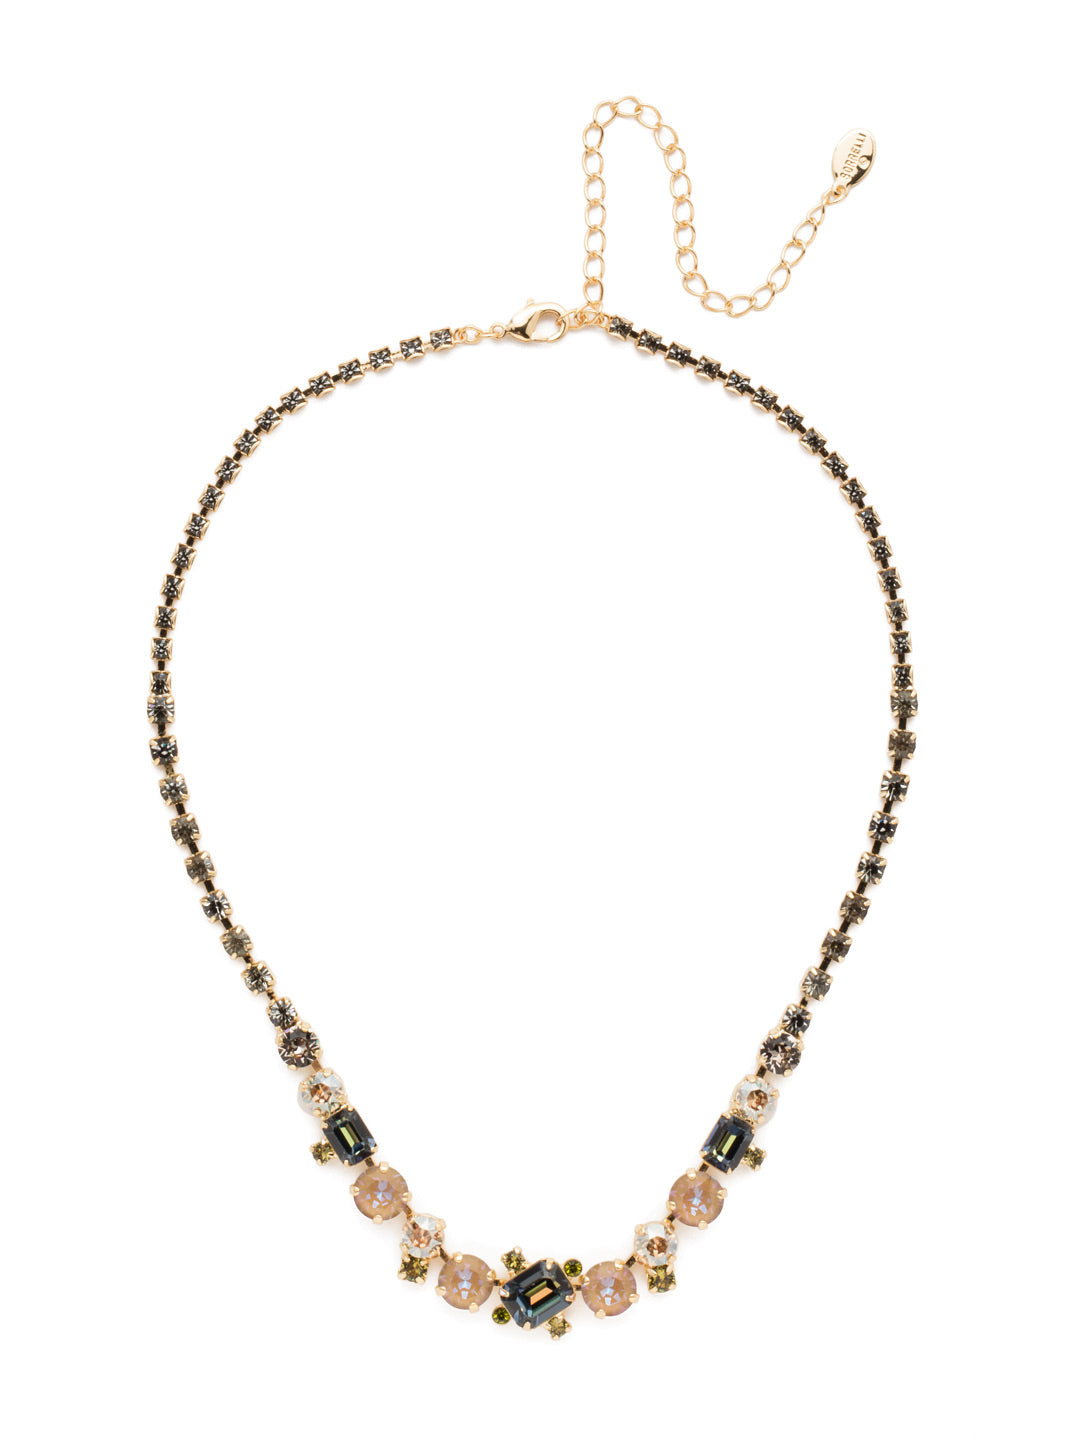 Tinsley Tennis Necklace - NEN17BGCSM - The Tinsley Statement Necklace exudes drama. Every inch is encrusted in sparkling crystals competing to be noticed. Fasten it on when you're looking for some attention. From Sorrelli's Cashmere collection in our Bright Gold-tone finish.